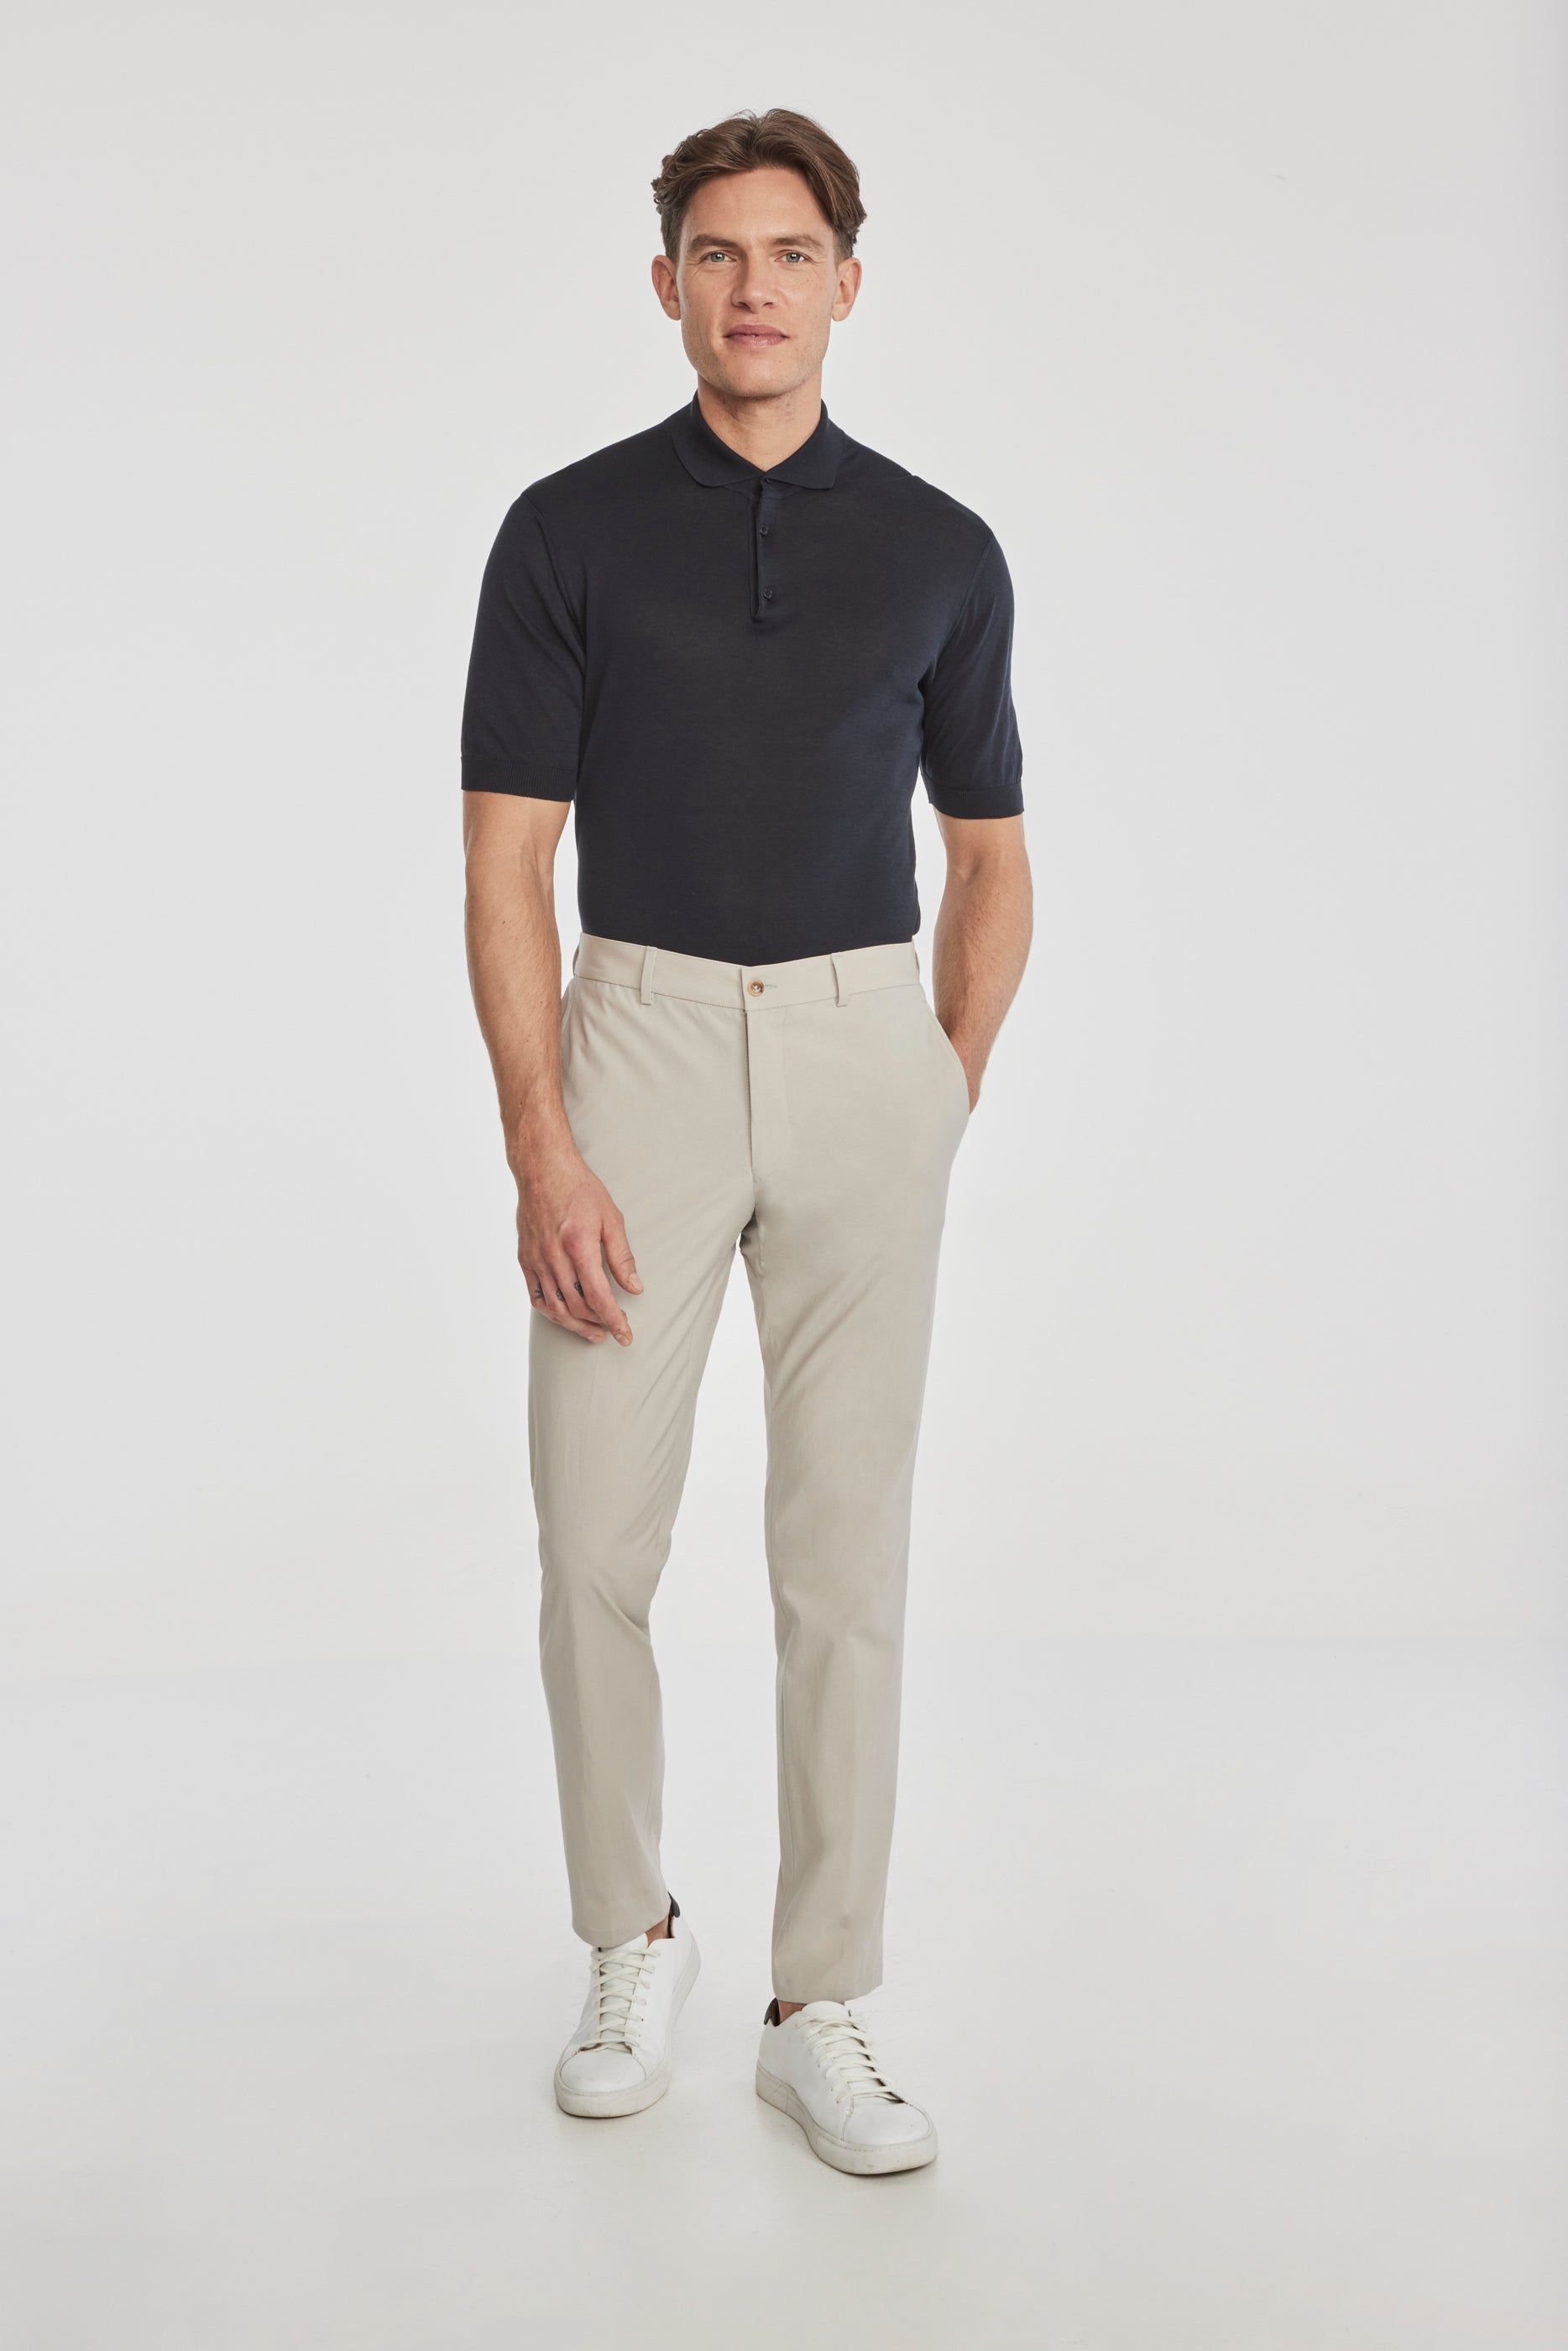 Alt view 1 Perth Wool and Cotton Stretch Pant in Tan